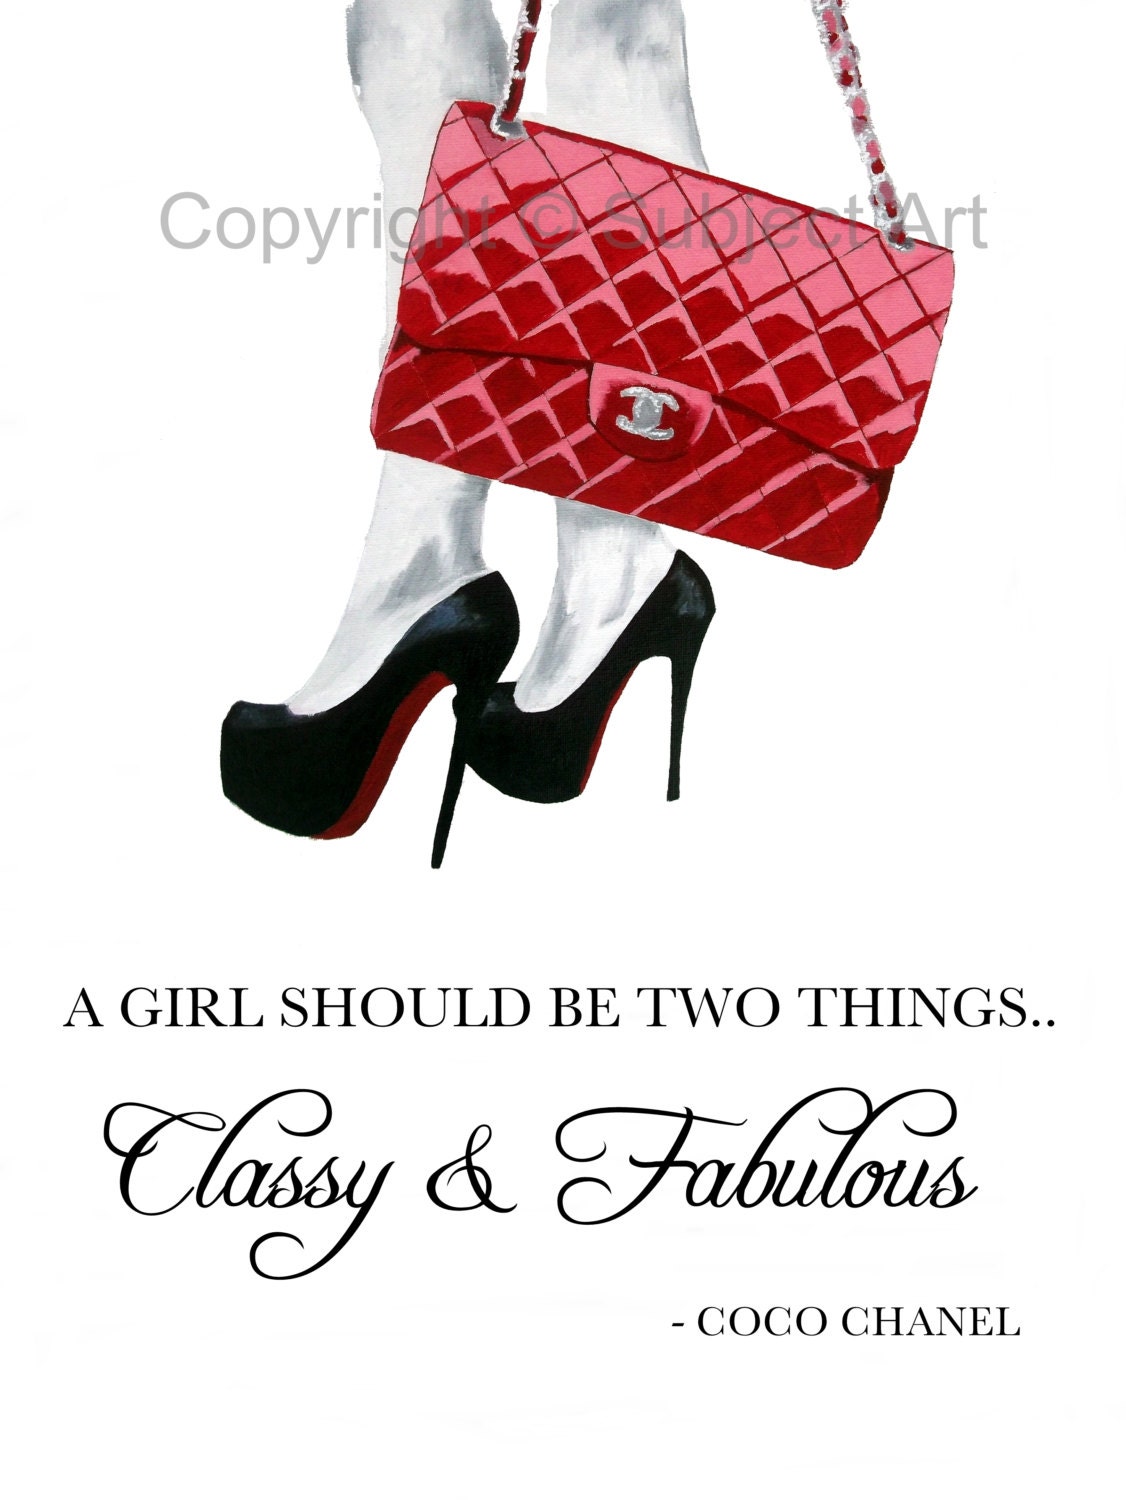 Popular items for christian louboutin on Etsy